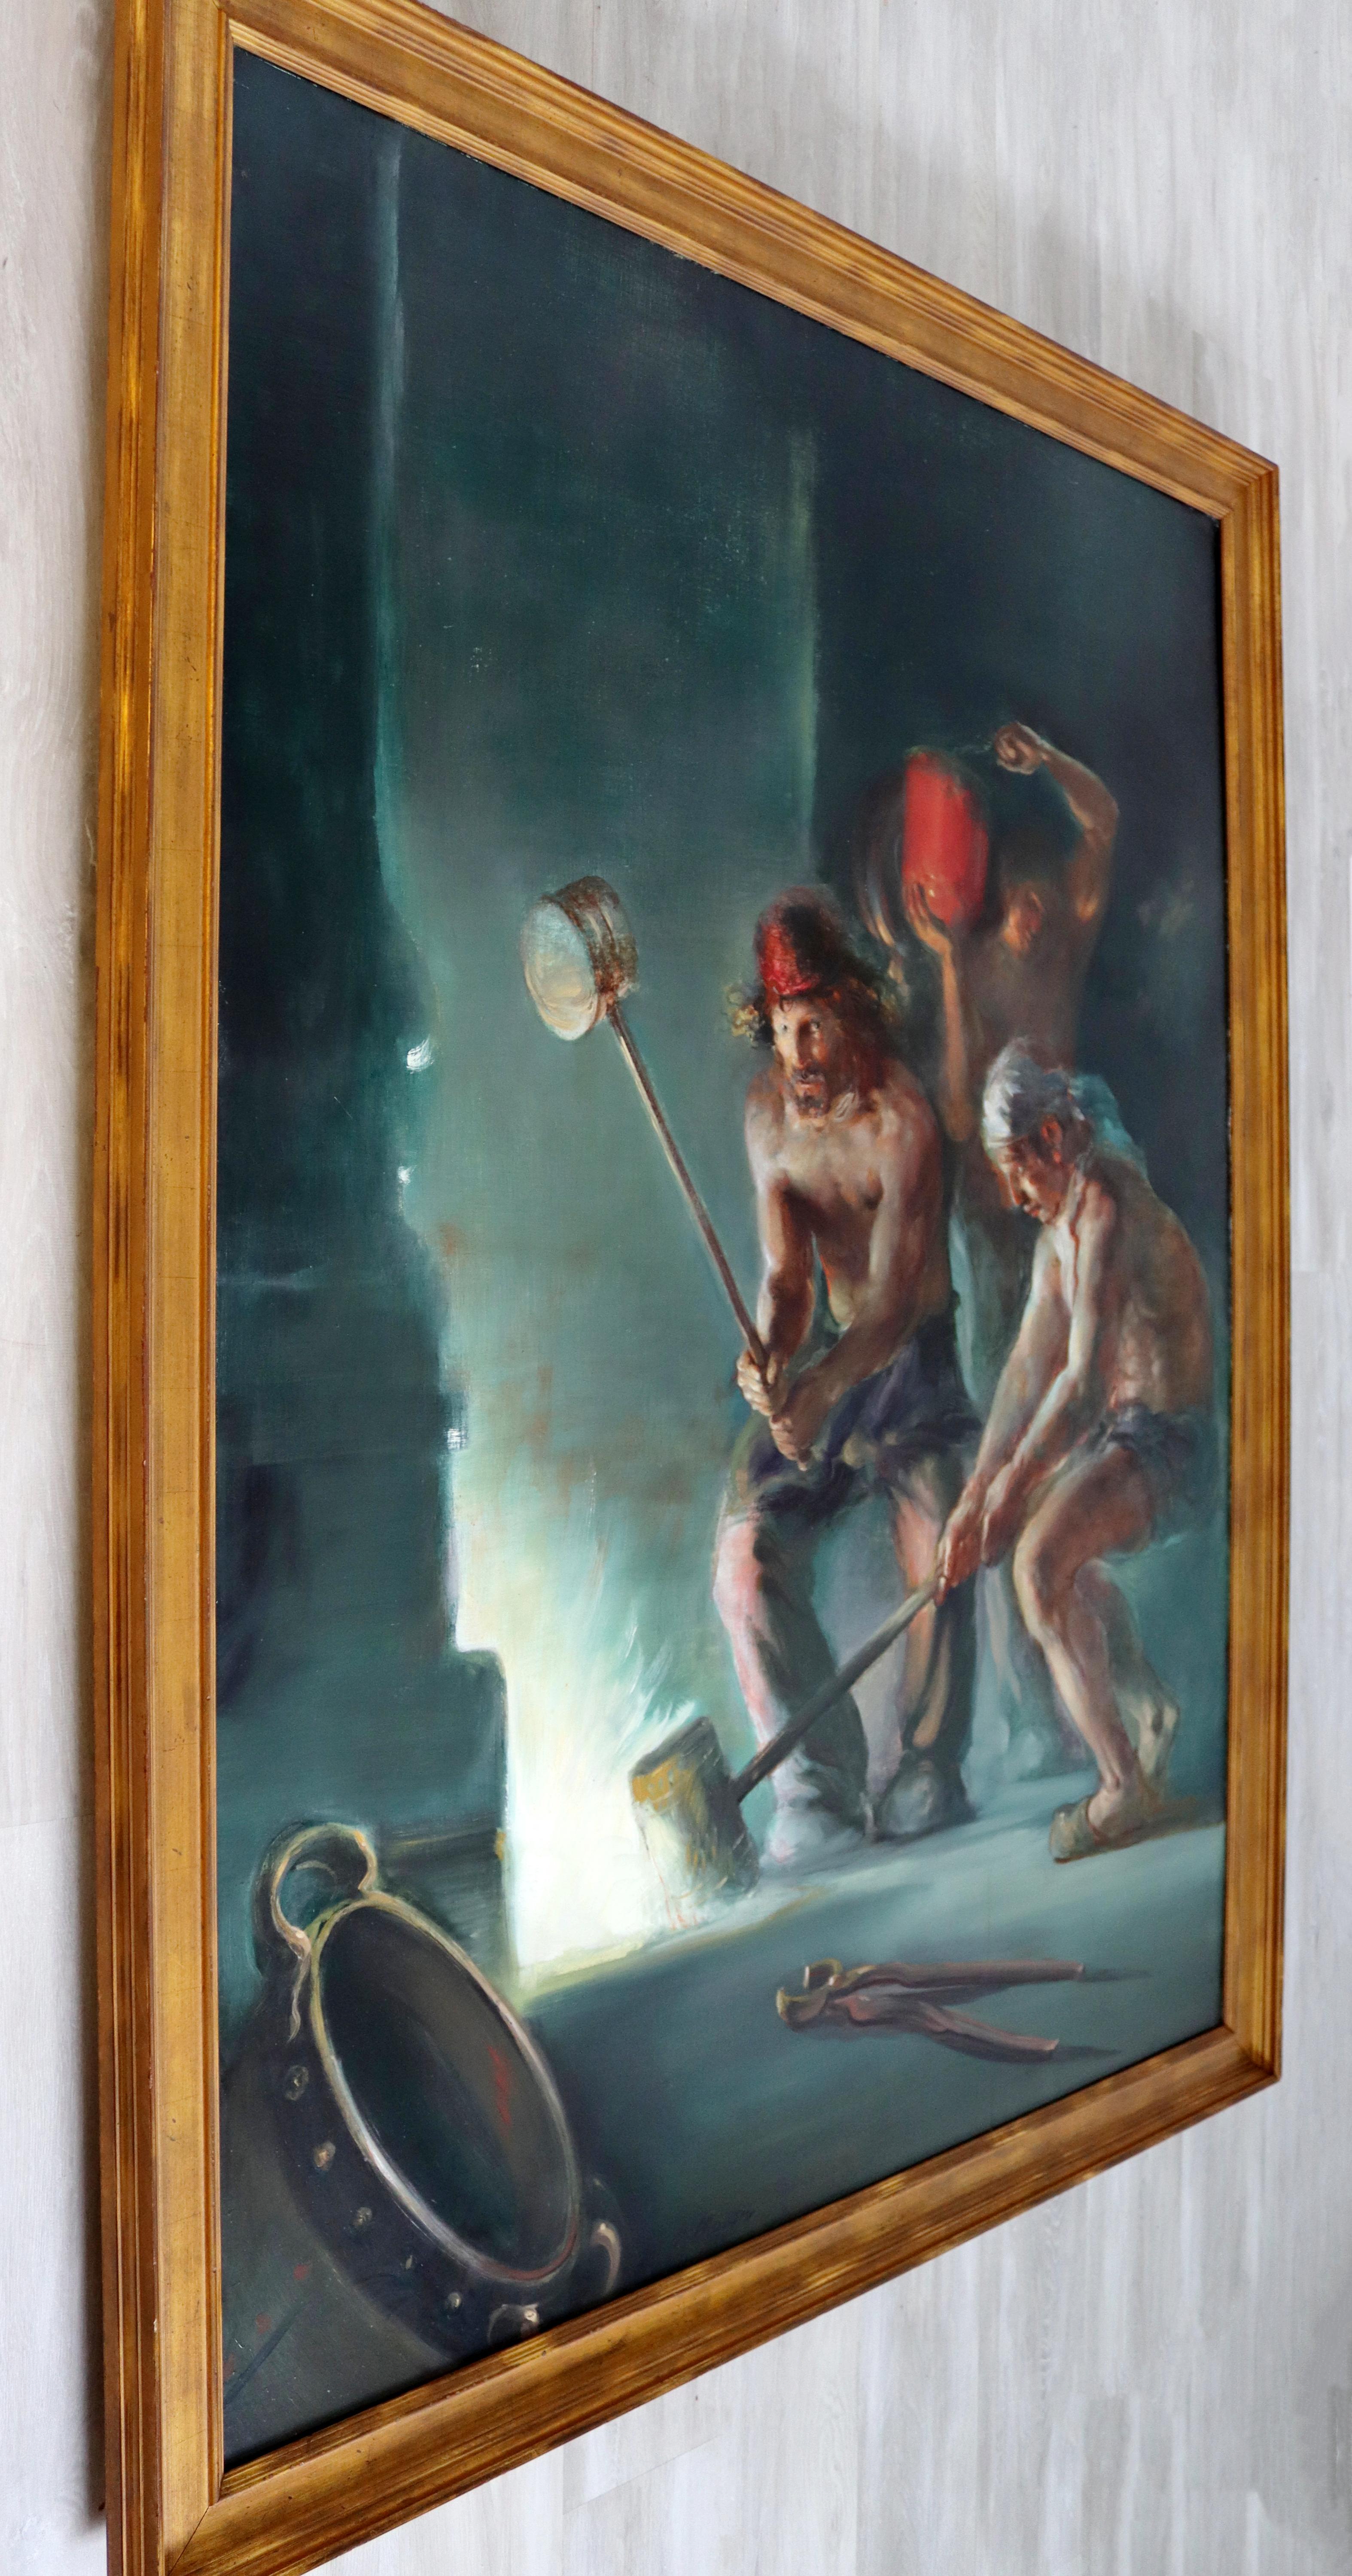 For your consideration is a framed oil on canvas painting, of three working men, entitled 